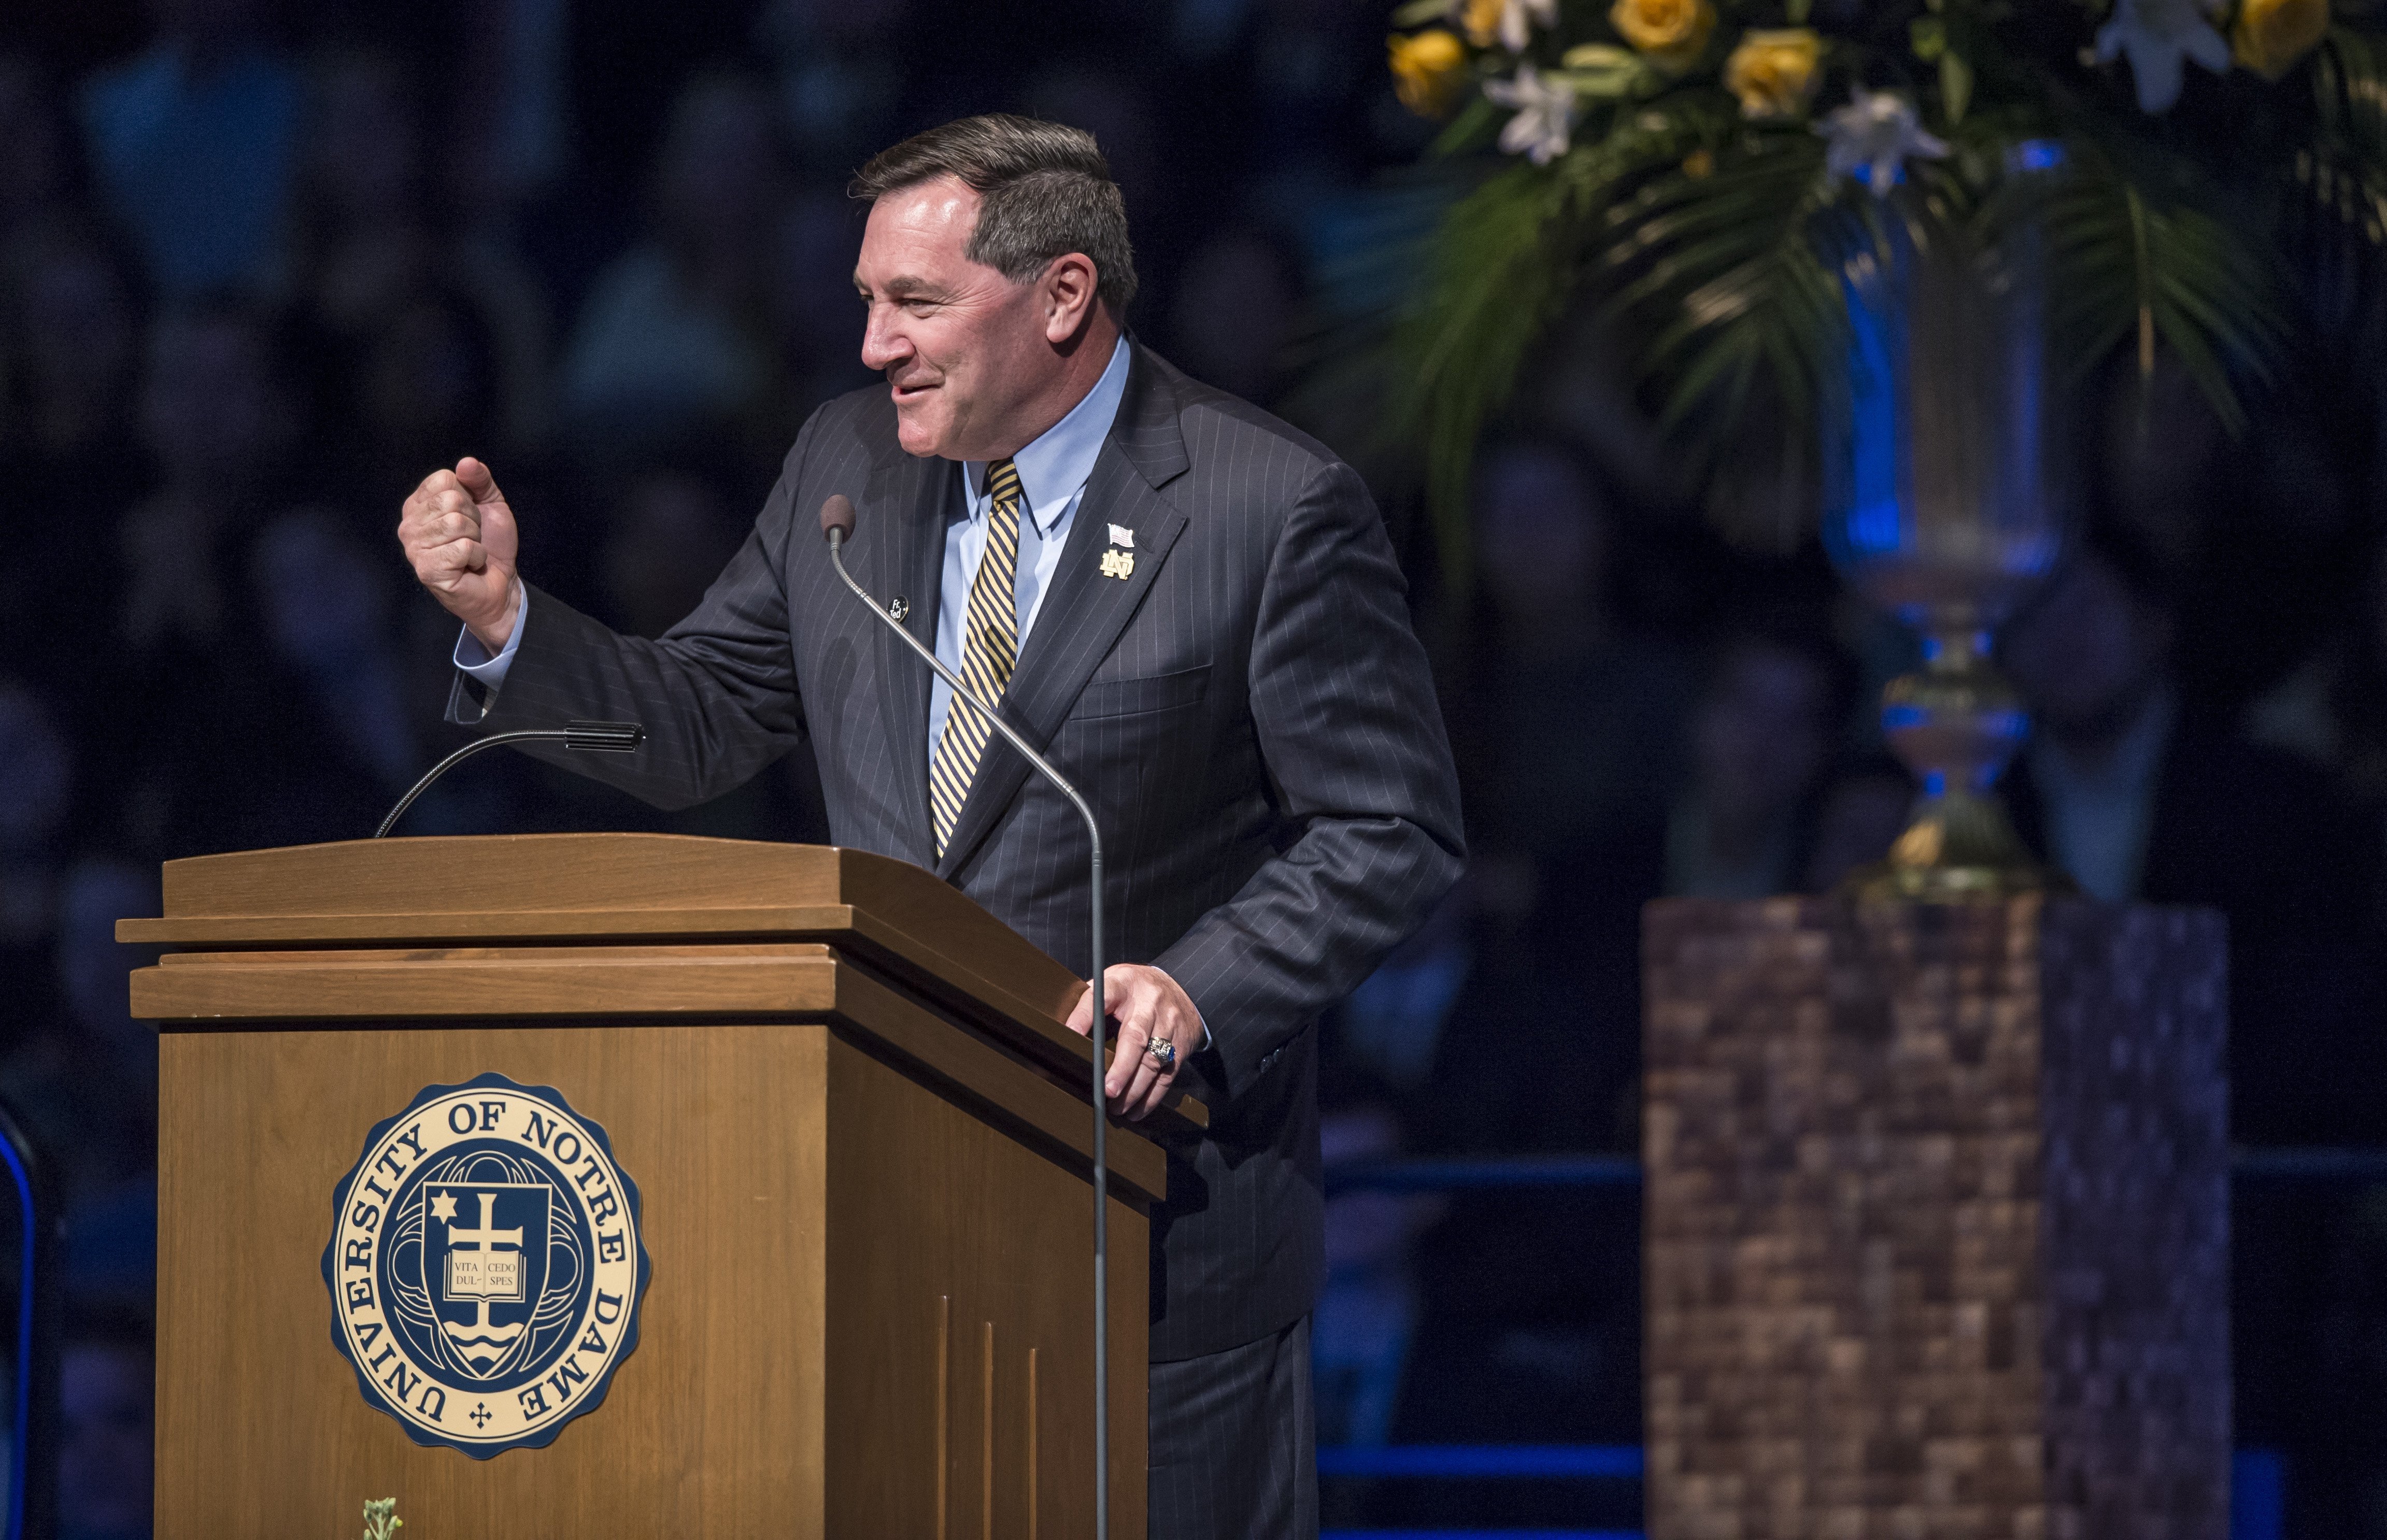 Joe Donnelly is pictured in a March 4, 2015, photo at the University of Notre Dame in South Bend, Ind. (CNS photo/Barbara Johnston, University of Notre Dame)